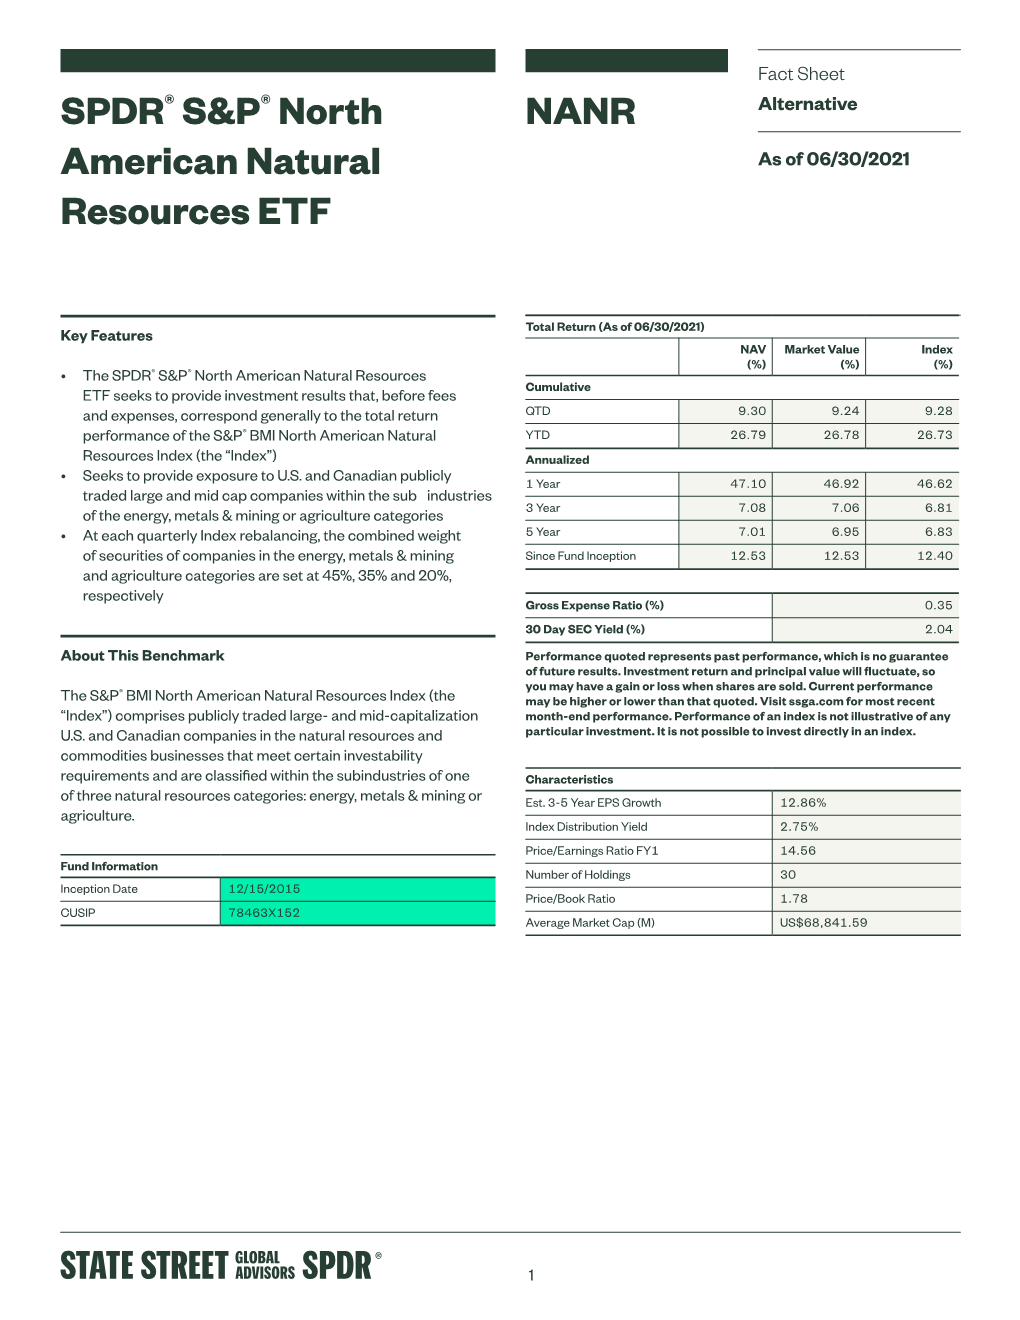 Fact Sheet:SPDR® S&P® North American Natural Resources ETF